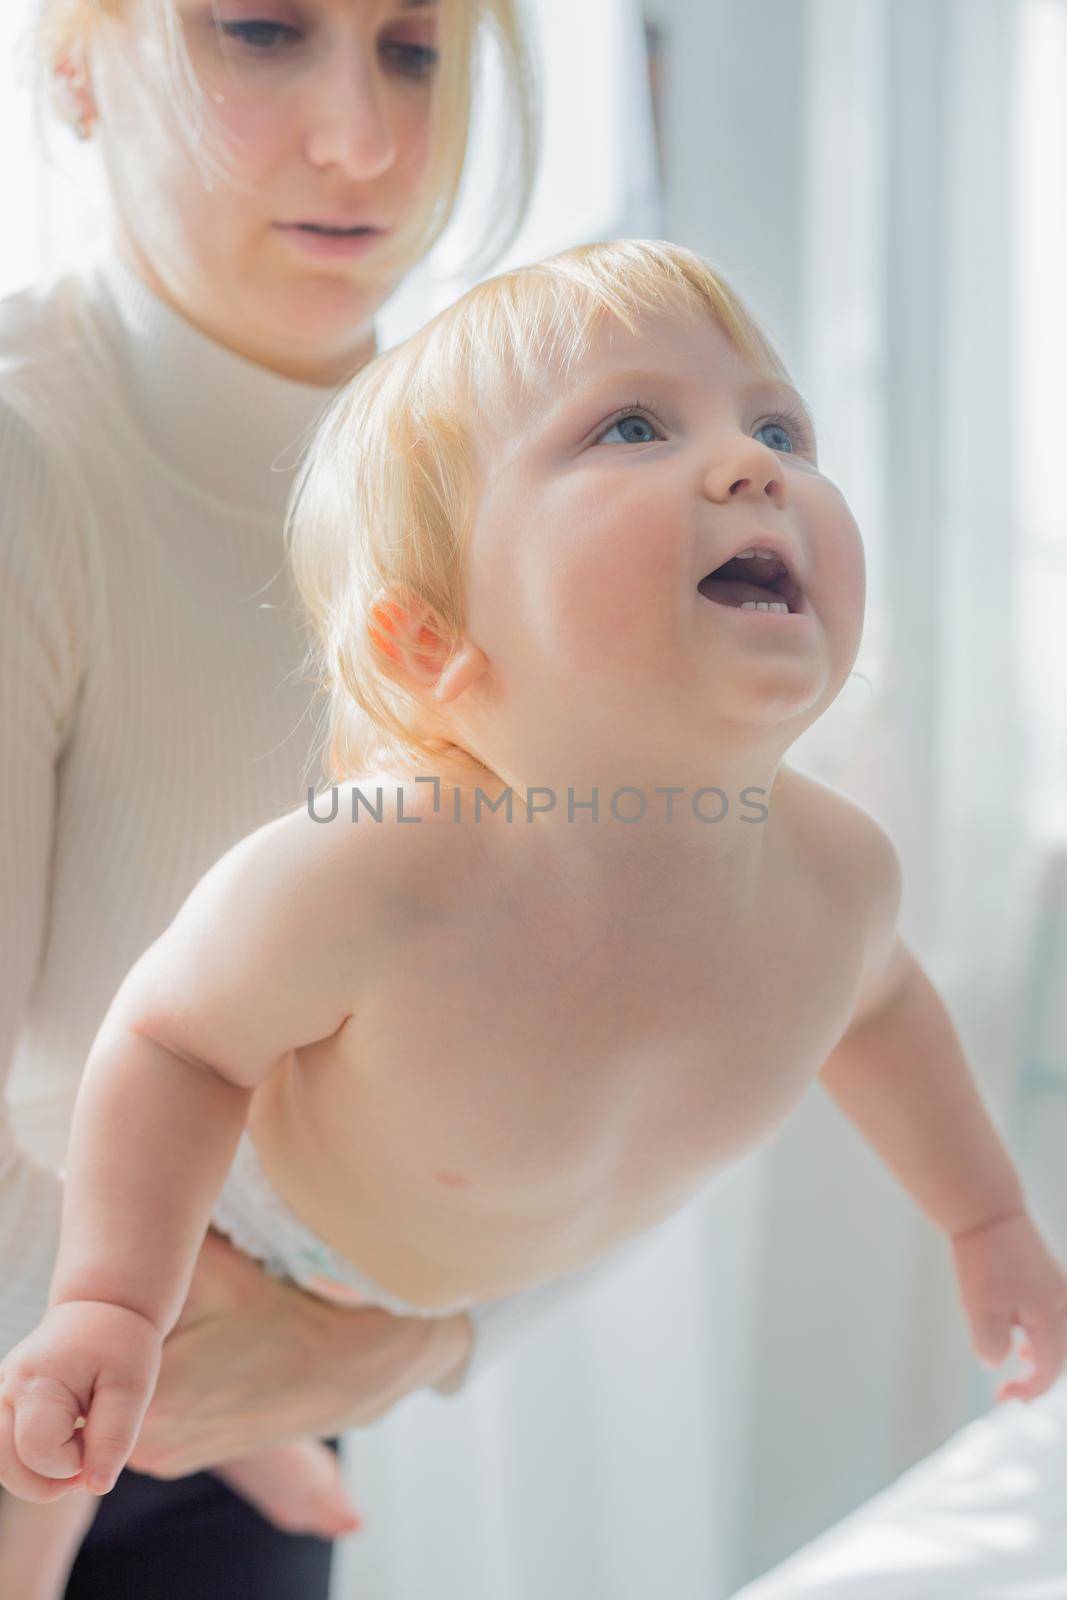 Mom does children's gymnastics for the baby, holding him by the chest. Close-up by Yurich32